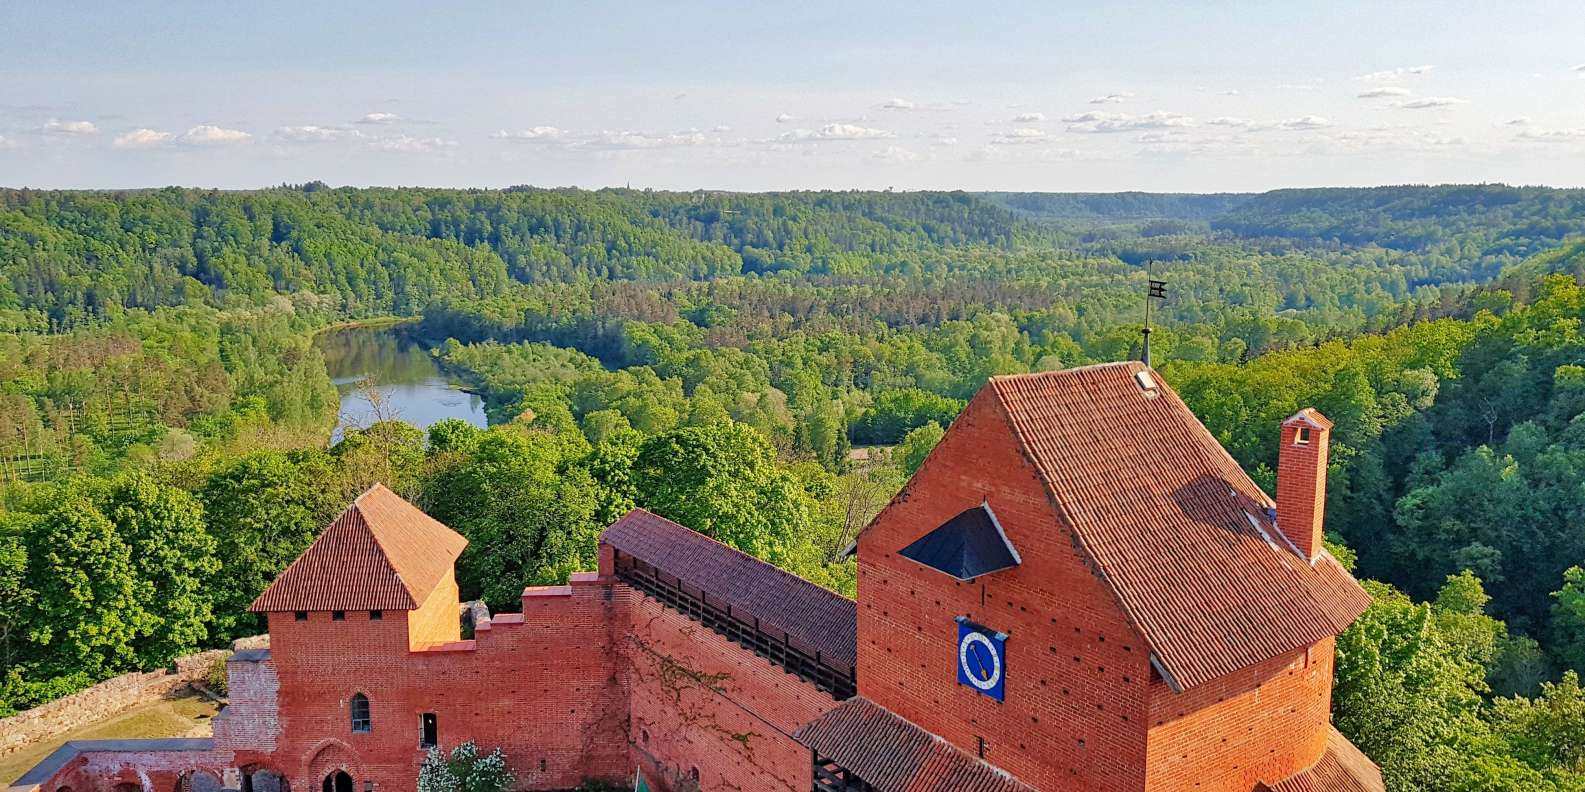 What to do in Sigulda